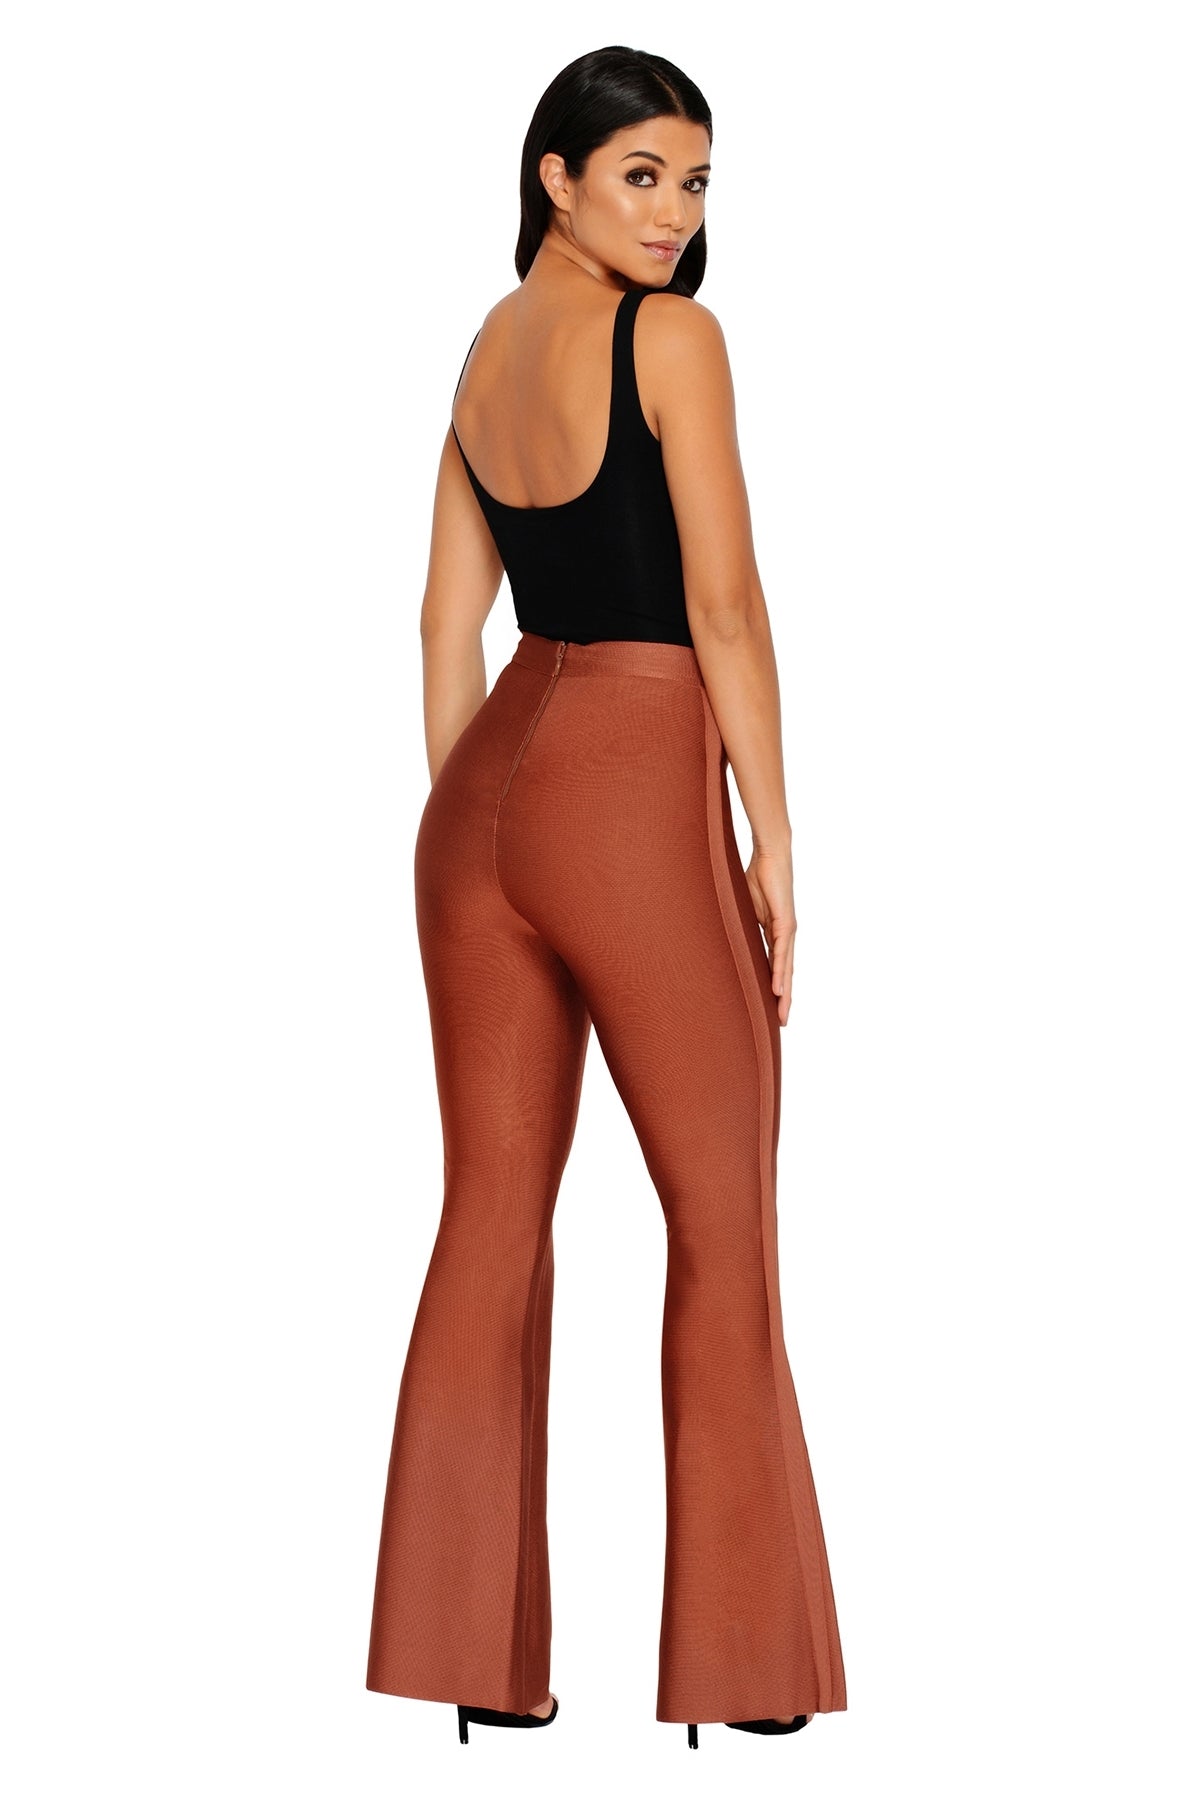 She Who Flares Wins Bandage Flare Trousers in Brown